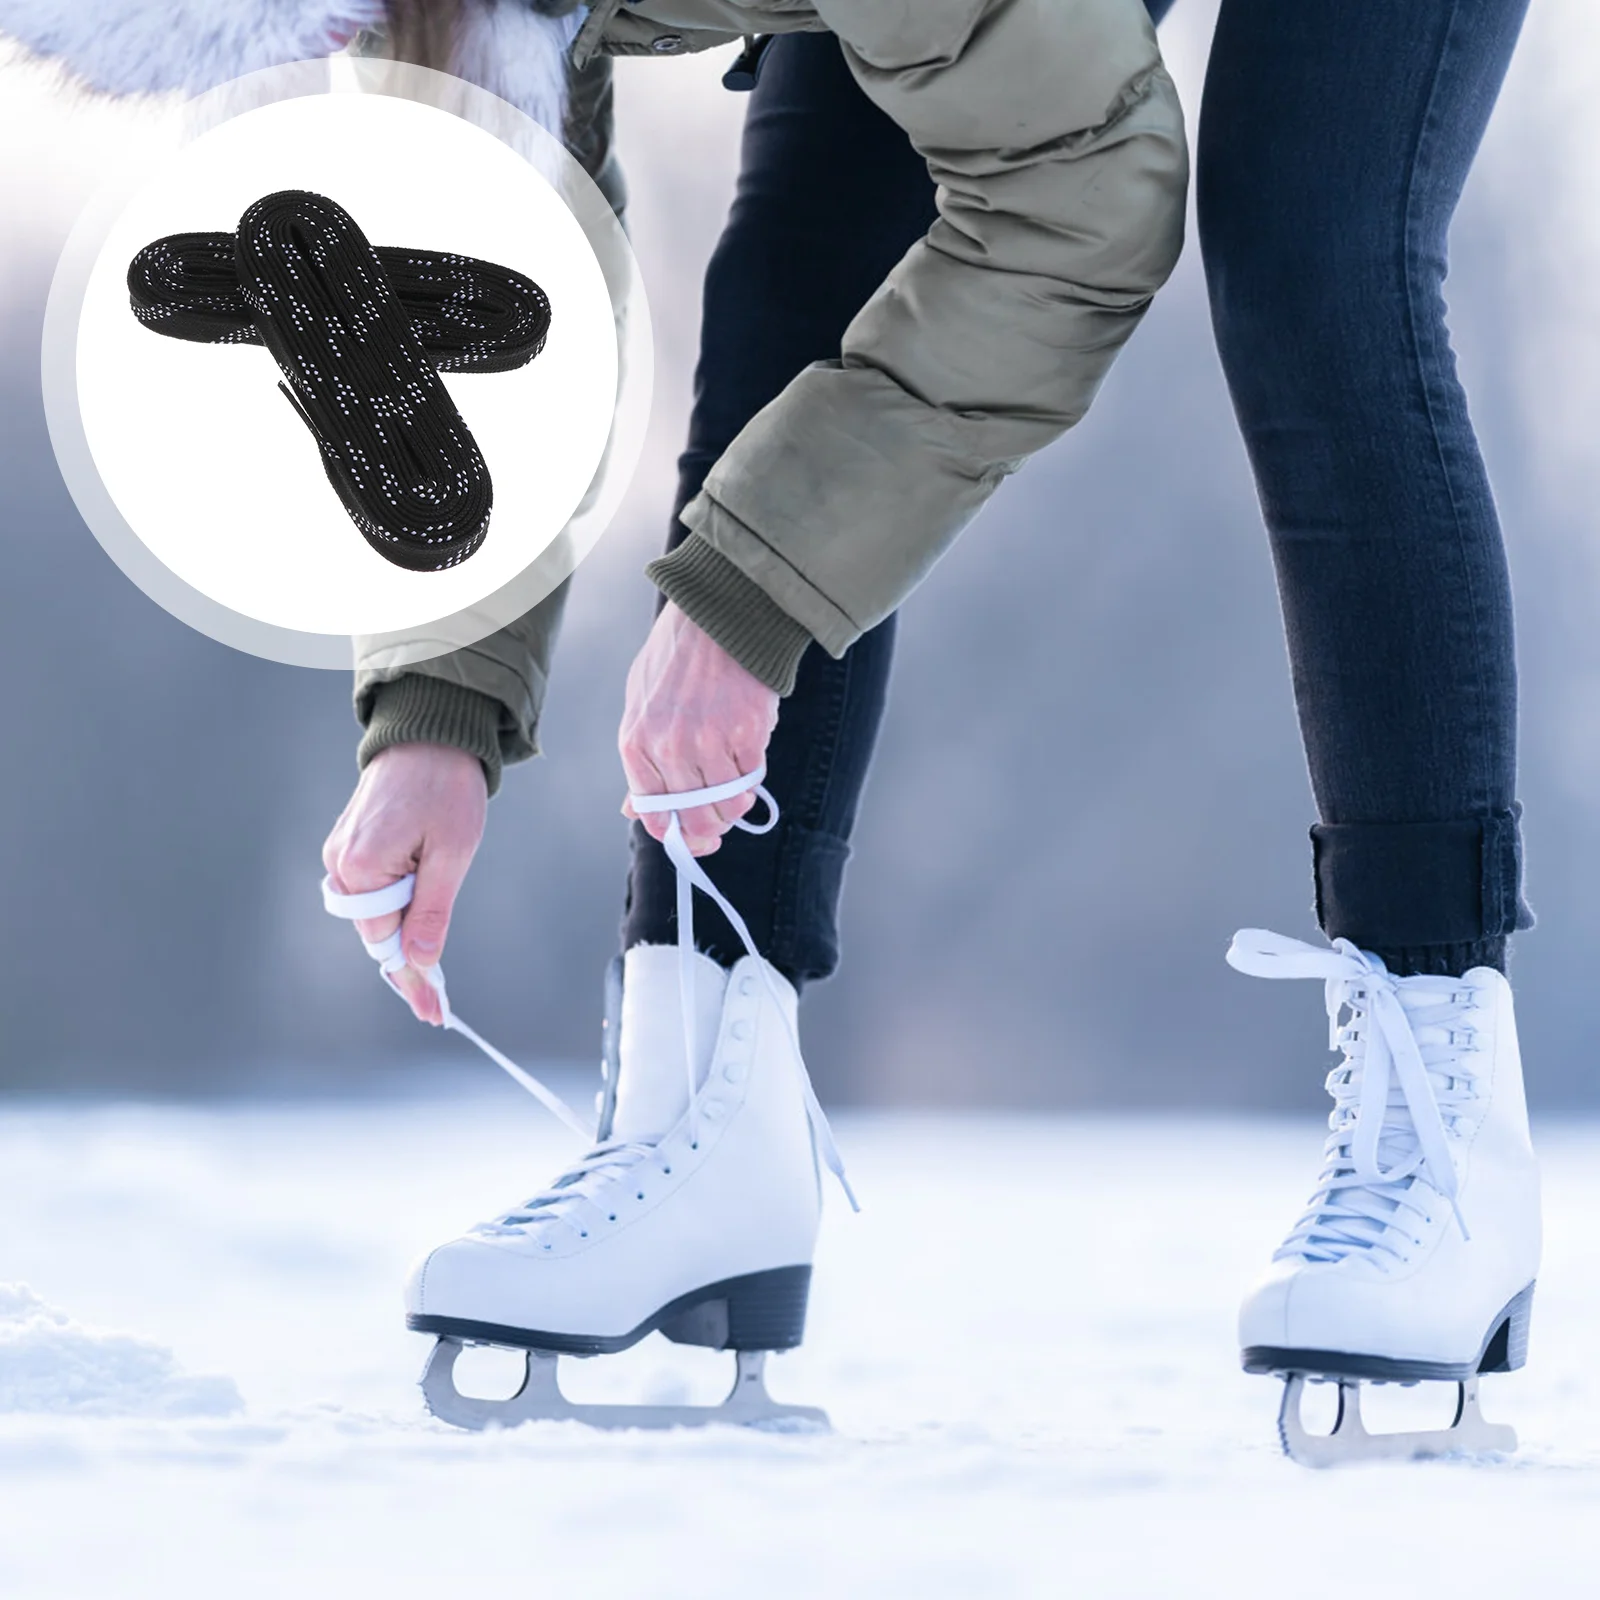 

Professional Ice Hockey Skate Laces Waxed Black Running Shoes For Men Anti-Freezing Anti-Fracture Shoe Laces for Sports Skiing